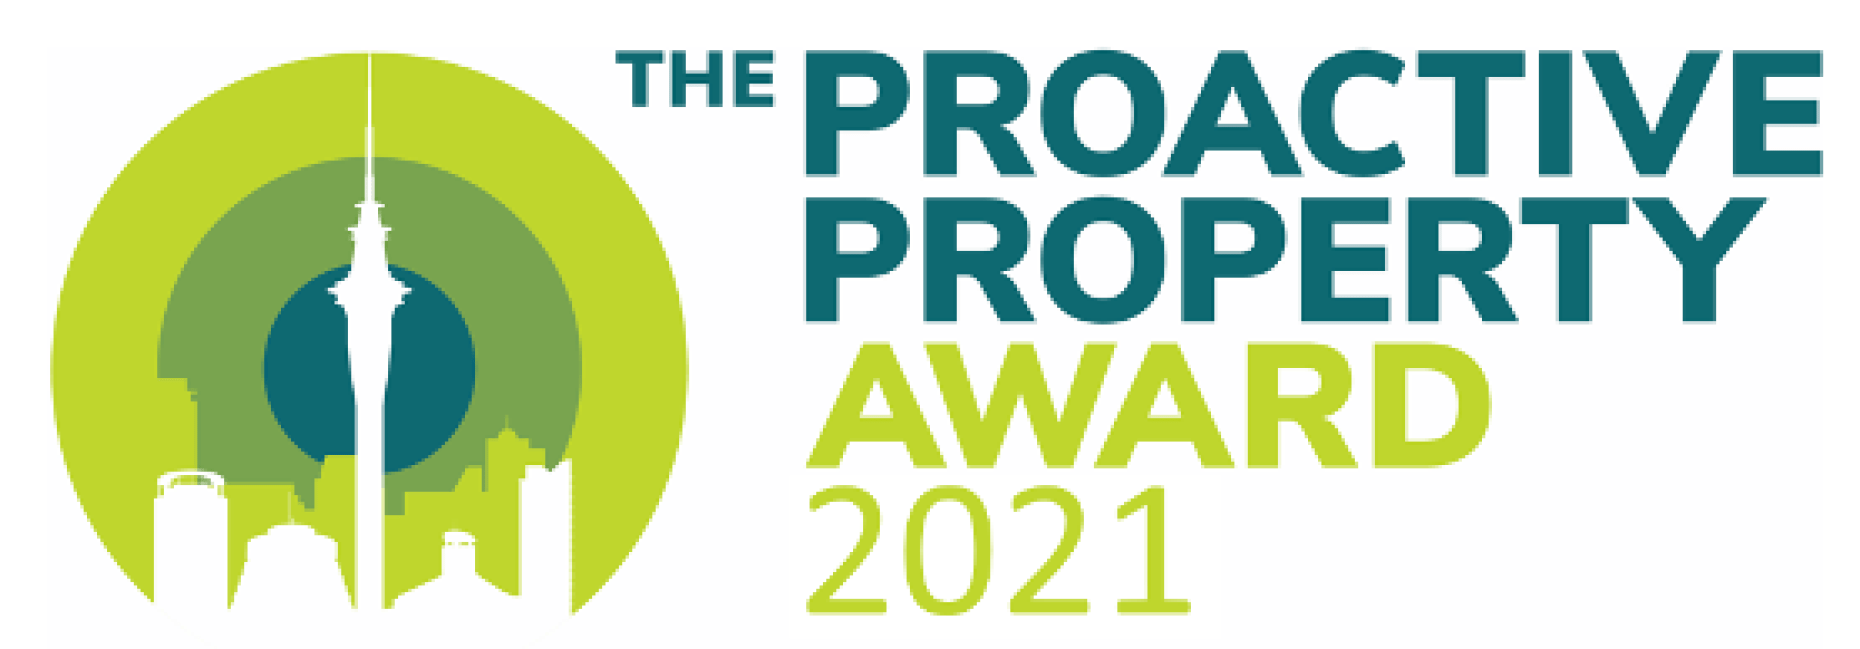 5 tips for a great Proactive Property Awards submission